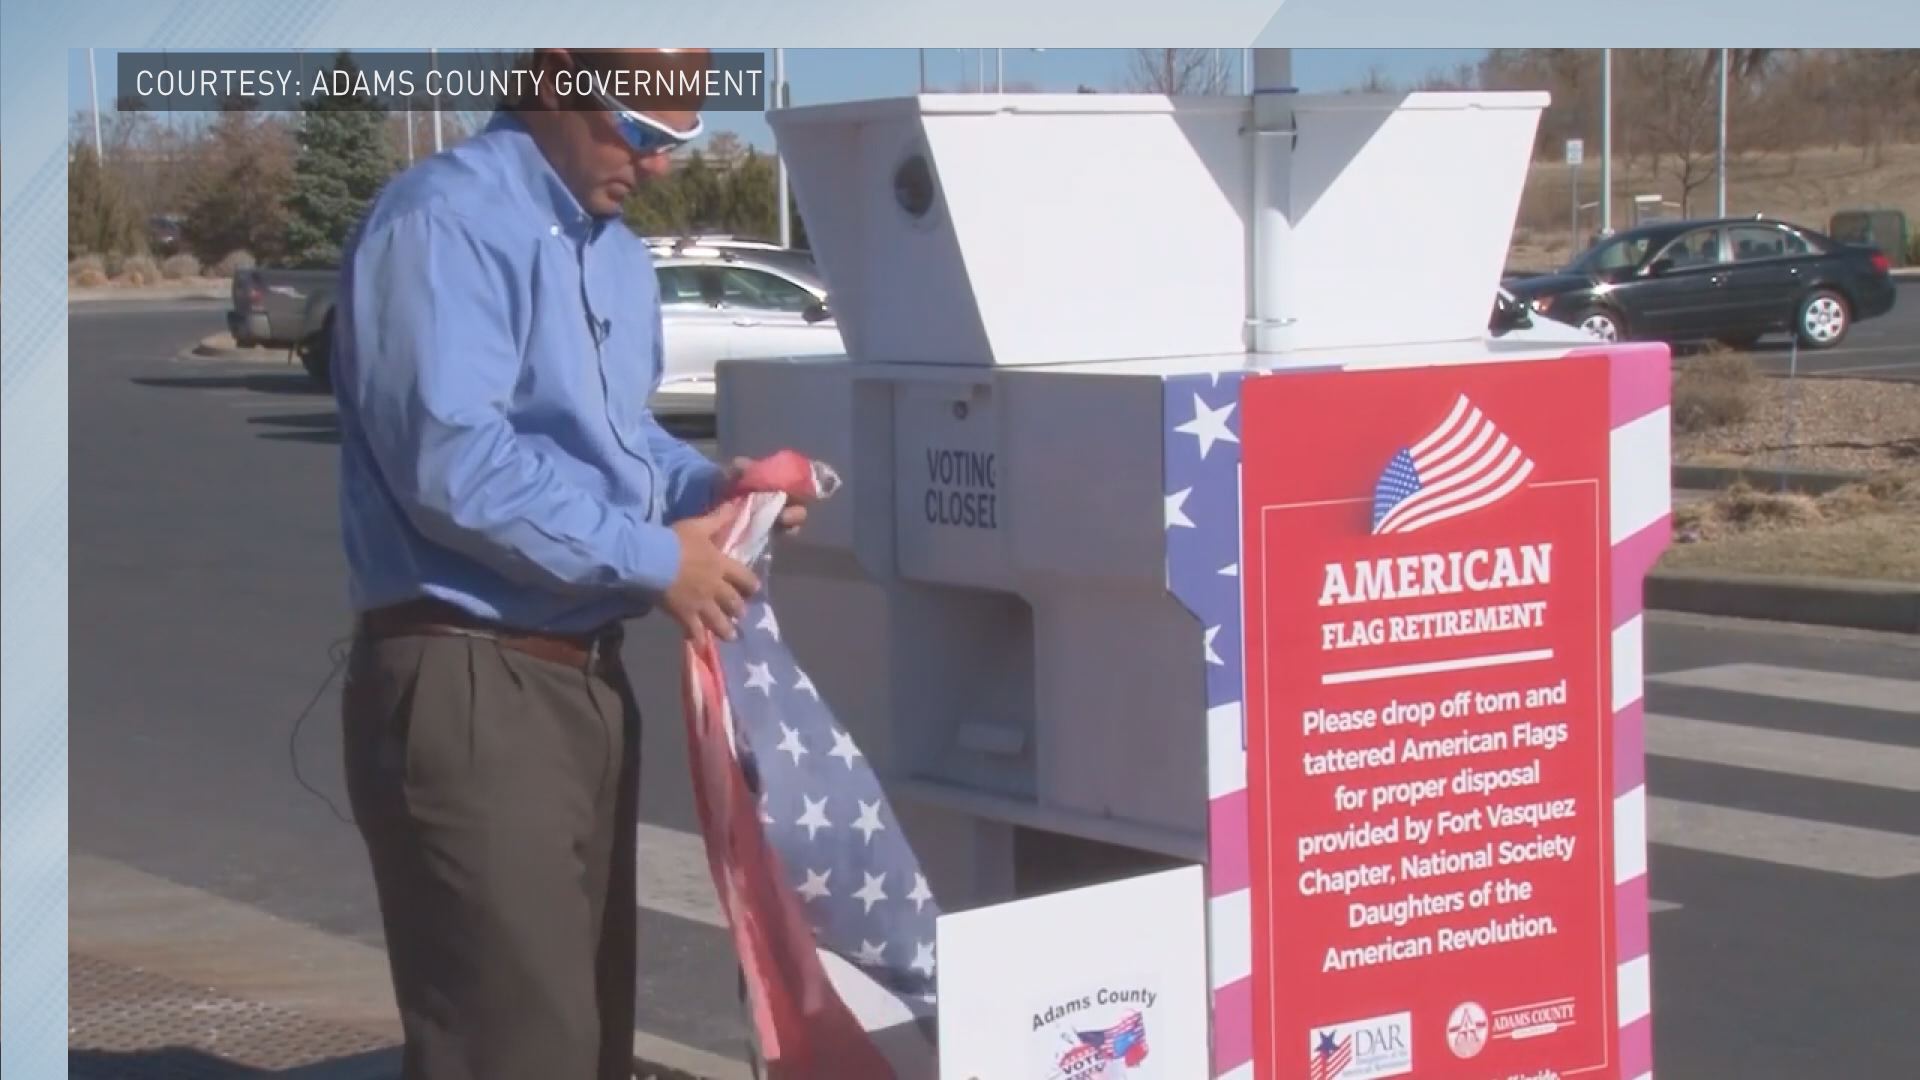 9news.com | Recycle your tattered American Flags in Adams County drop-boxes